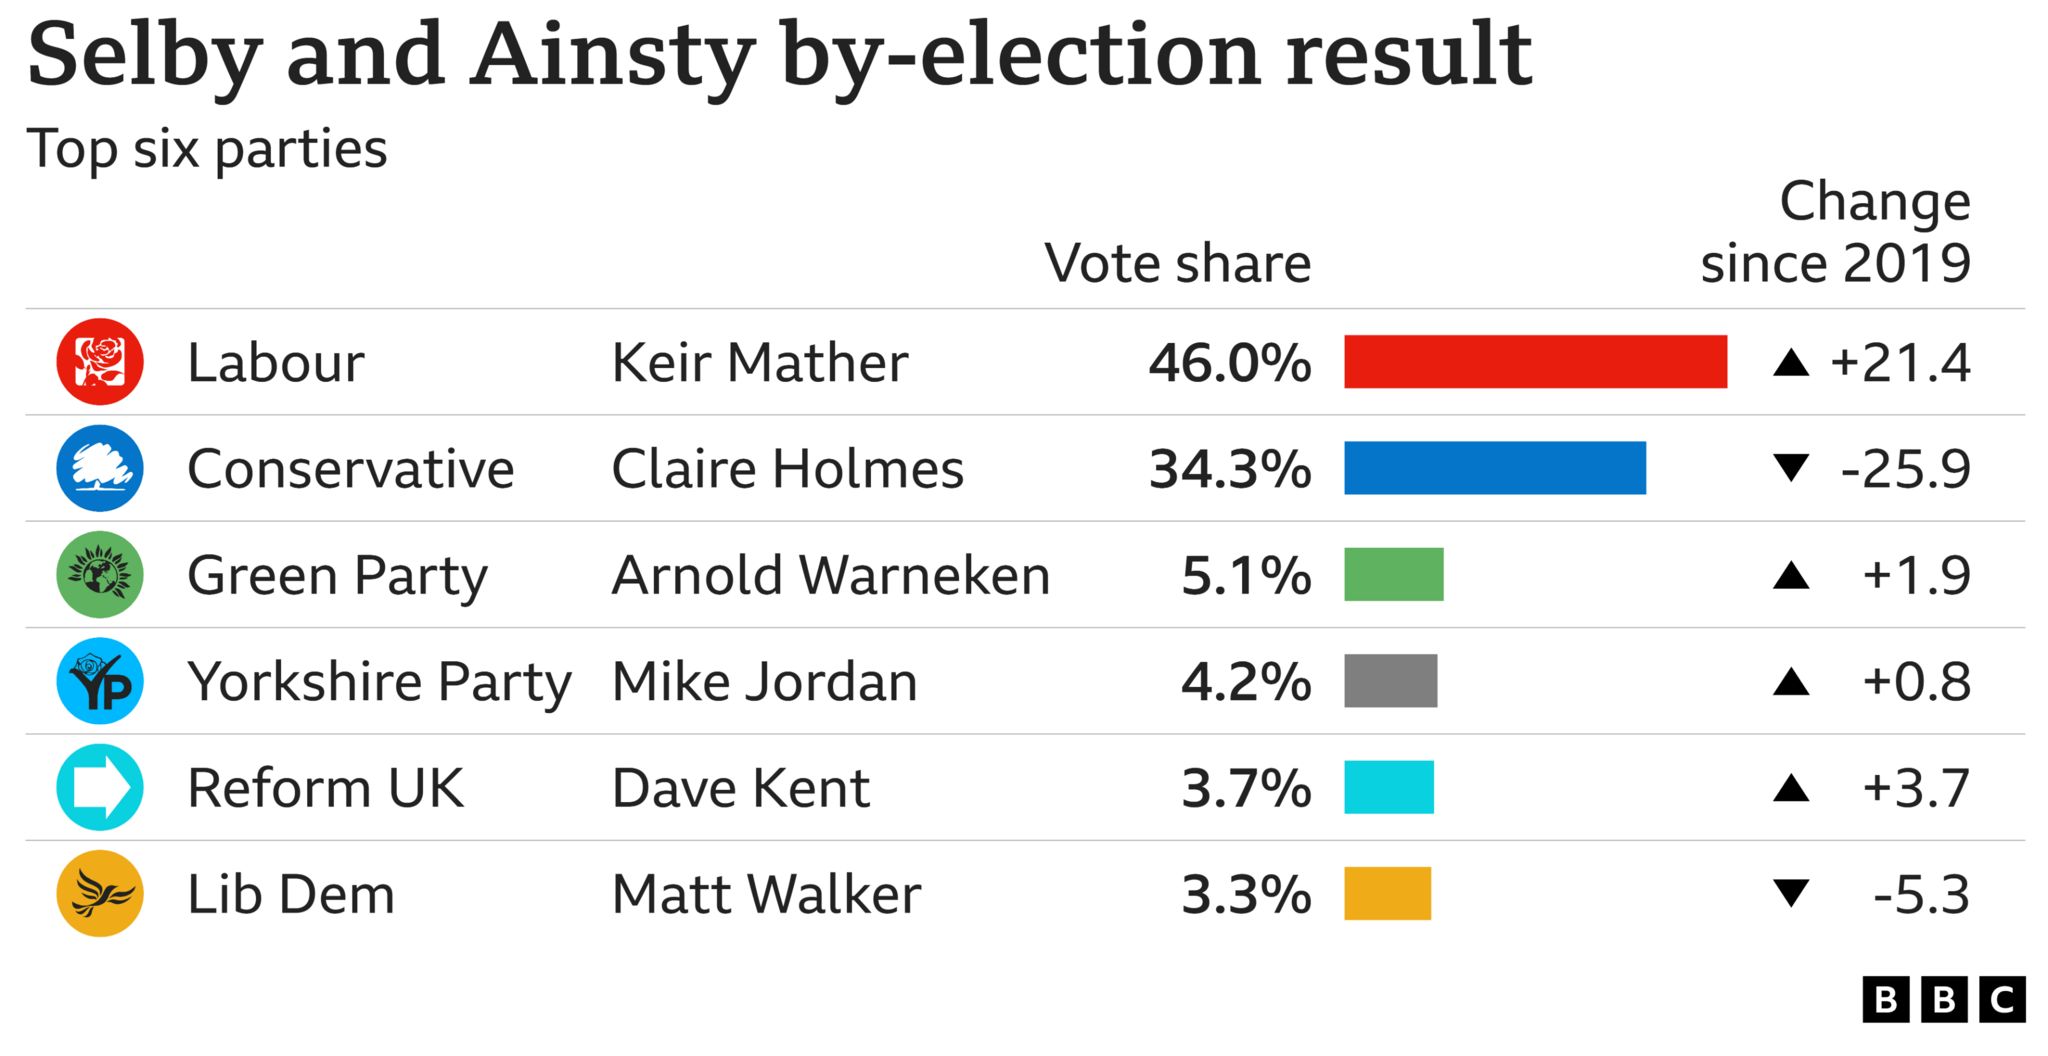 Selby and Ainsty by-election result